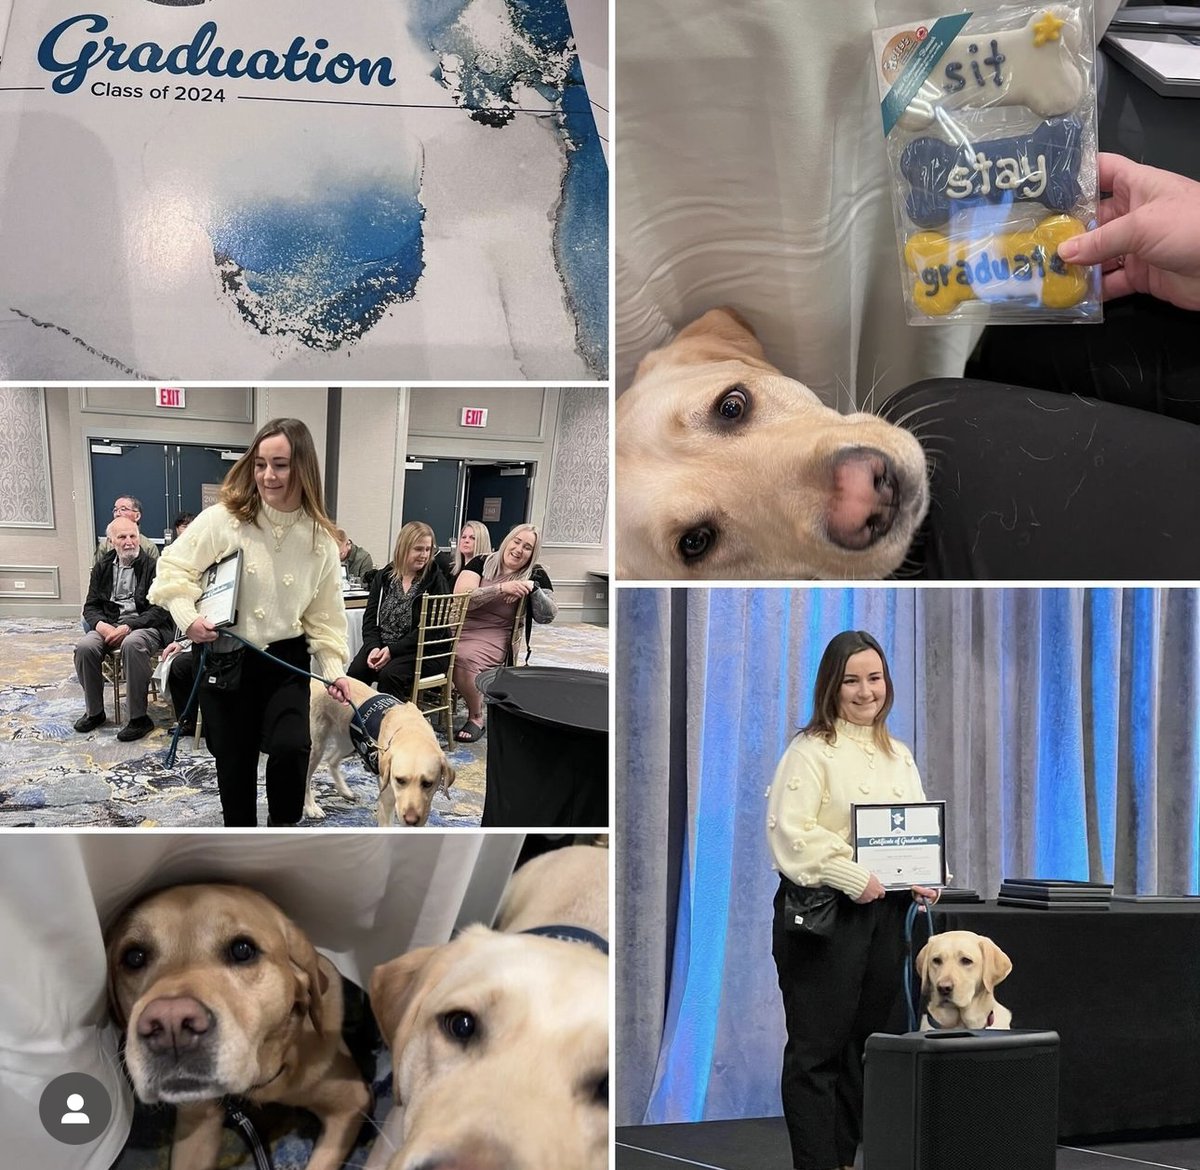 🎉🐾🎓 Congratulations today to Therapist Danielle and DWW Eddy! It was Graduation Day with Dogs with Wings, and we are SO GRATEFUL to our facility dogs at Little Warriors! 🎉🐾🎓

#healingtrauma #dogswithwings #graduation
#therapydogs #animaltherapy #transforminglives